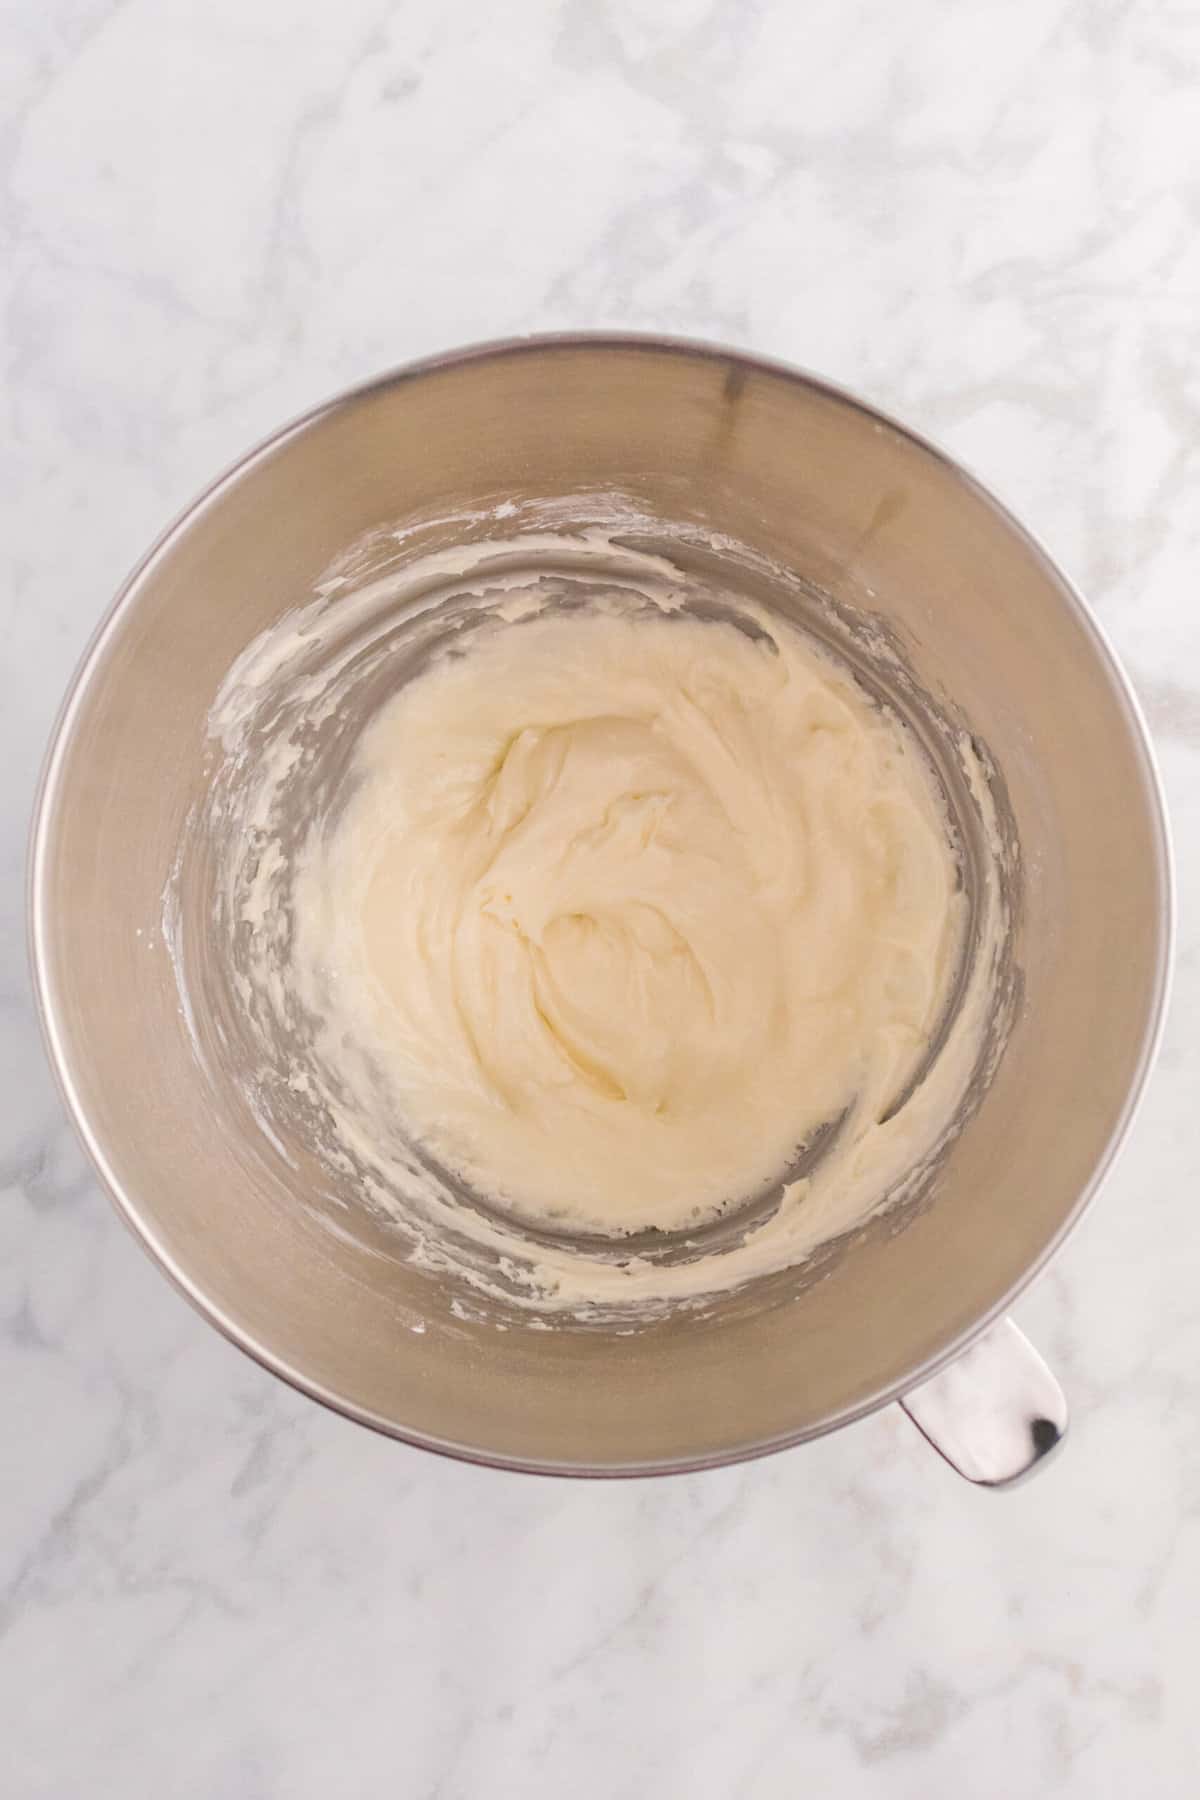 Add in the vanilla extract and 2 tablespoons of cream. Whip for another minute.